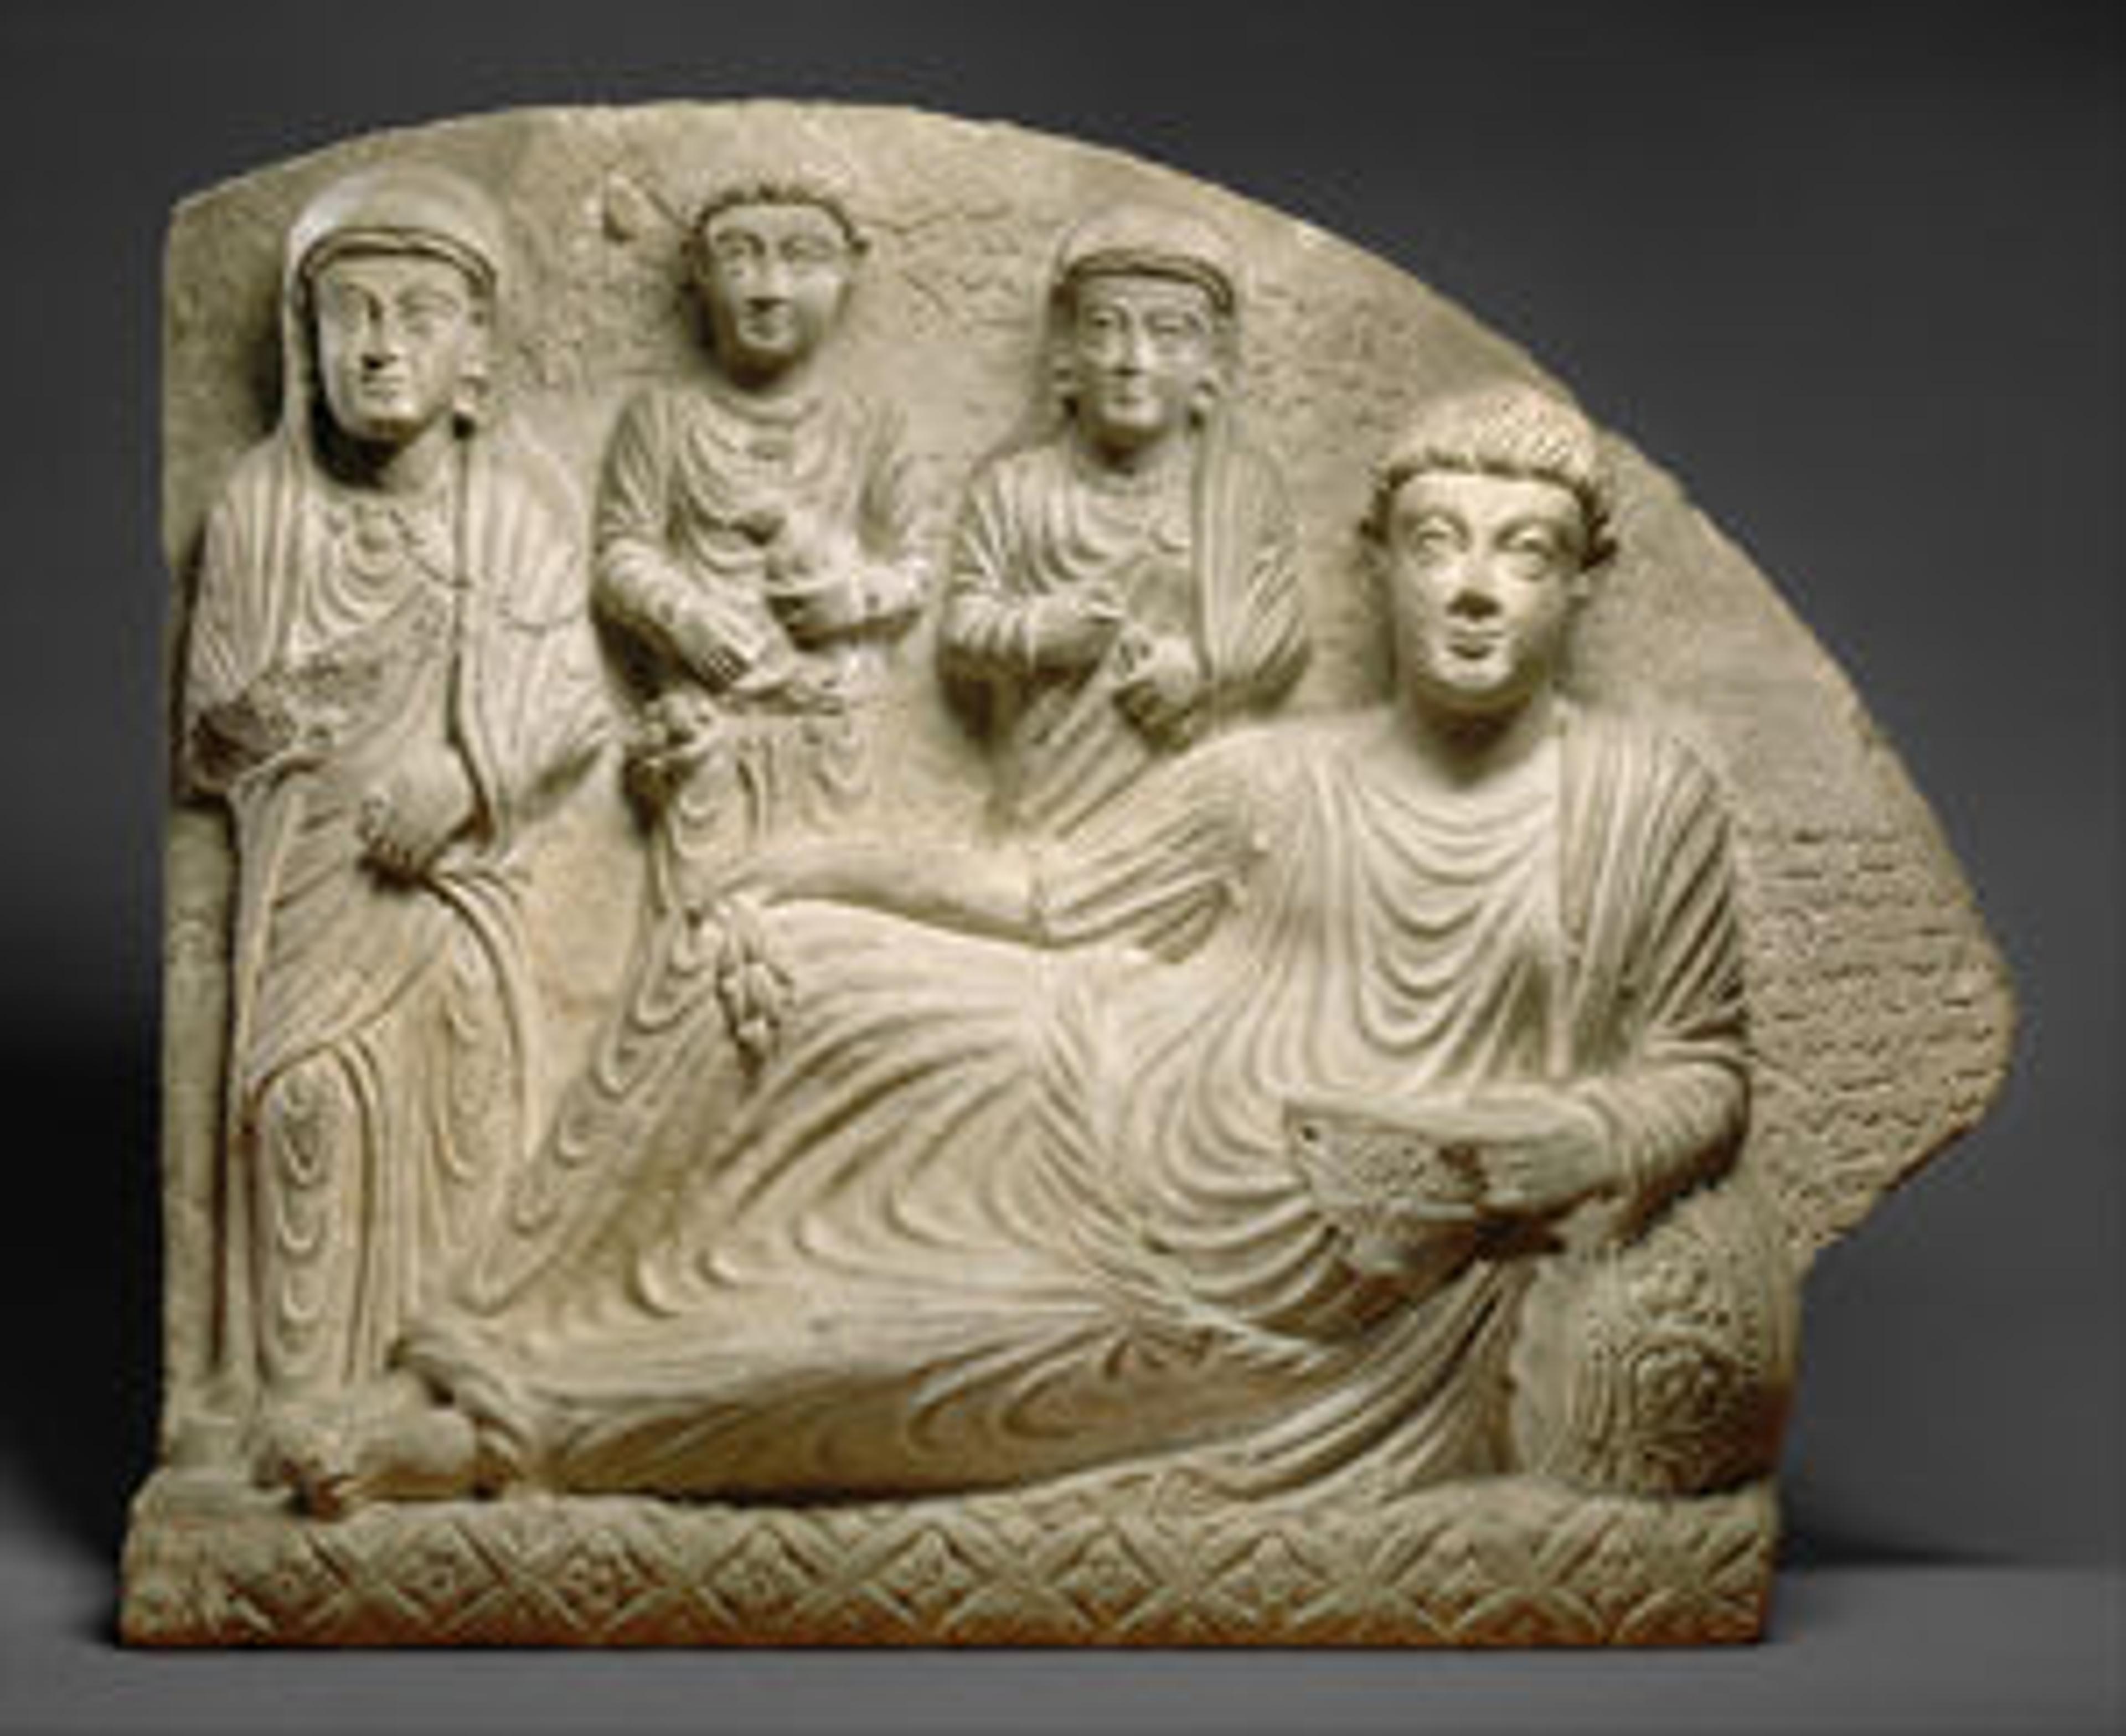 Gravestone with funerary banquet (02.29.1)